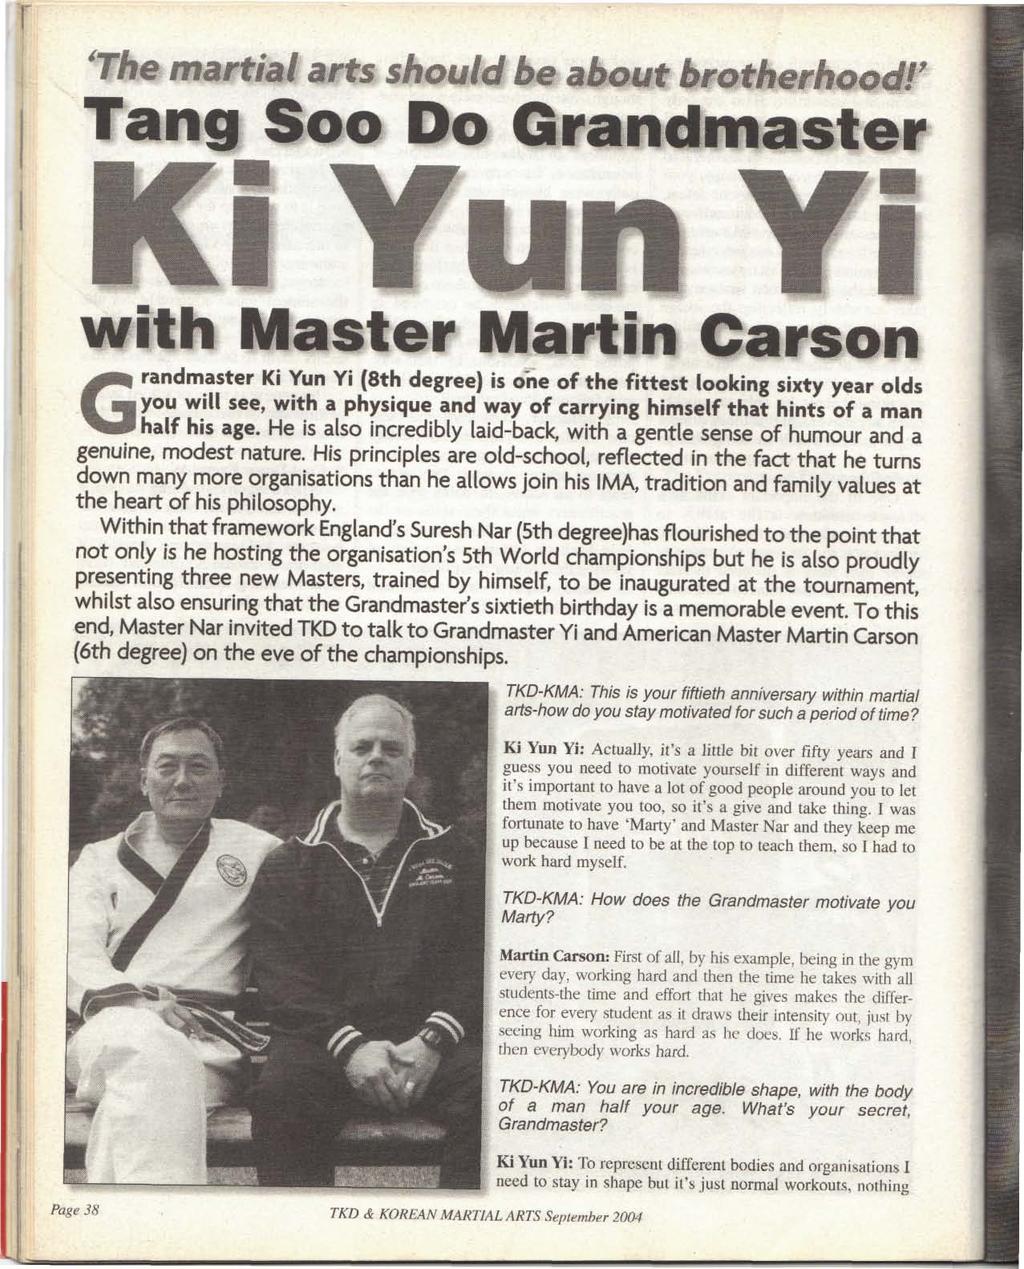 martial arts shmim 6* aiewf Tart Soo Do Grandmaster with Master Martin Carson G randmaster Ki Yun Yi (8th degree) is one of the fittest looking sixty year olds you will see, with a physique and way